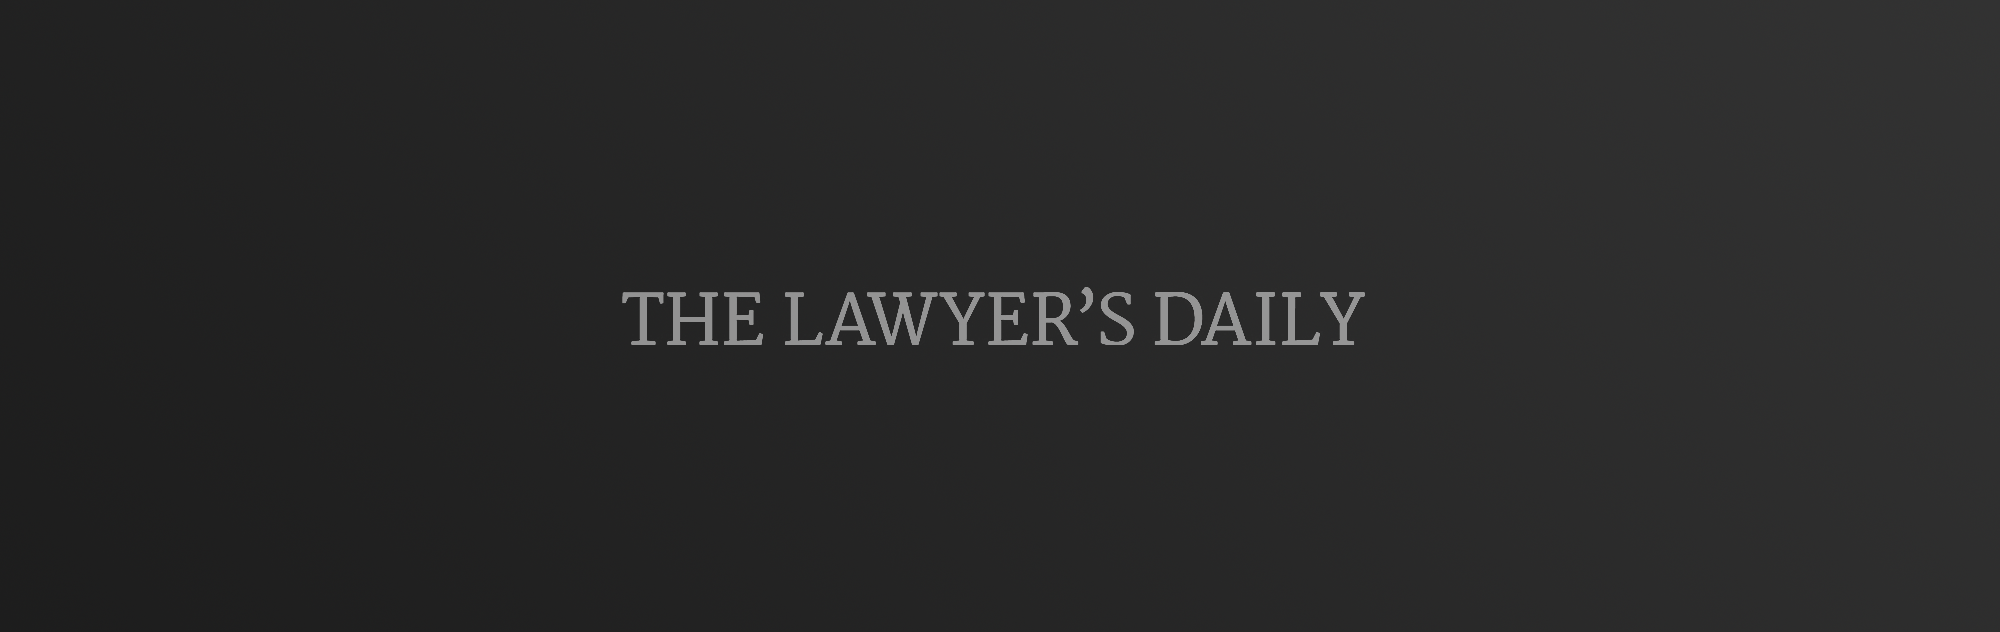 The Lawyer's Daily logo on dark gradient background